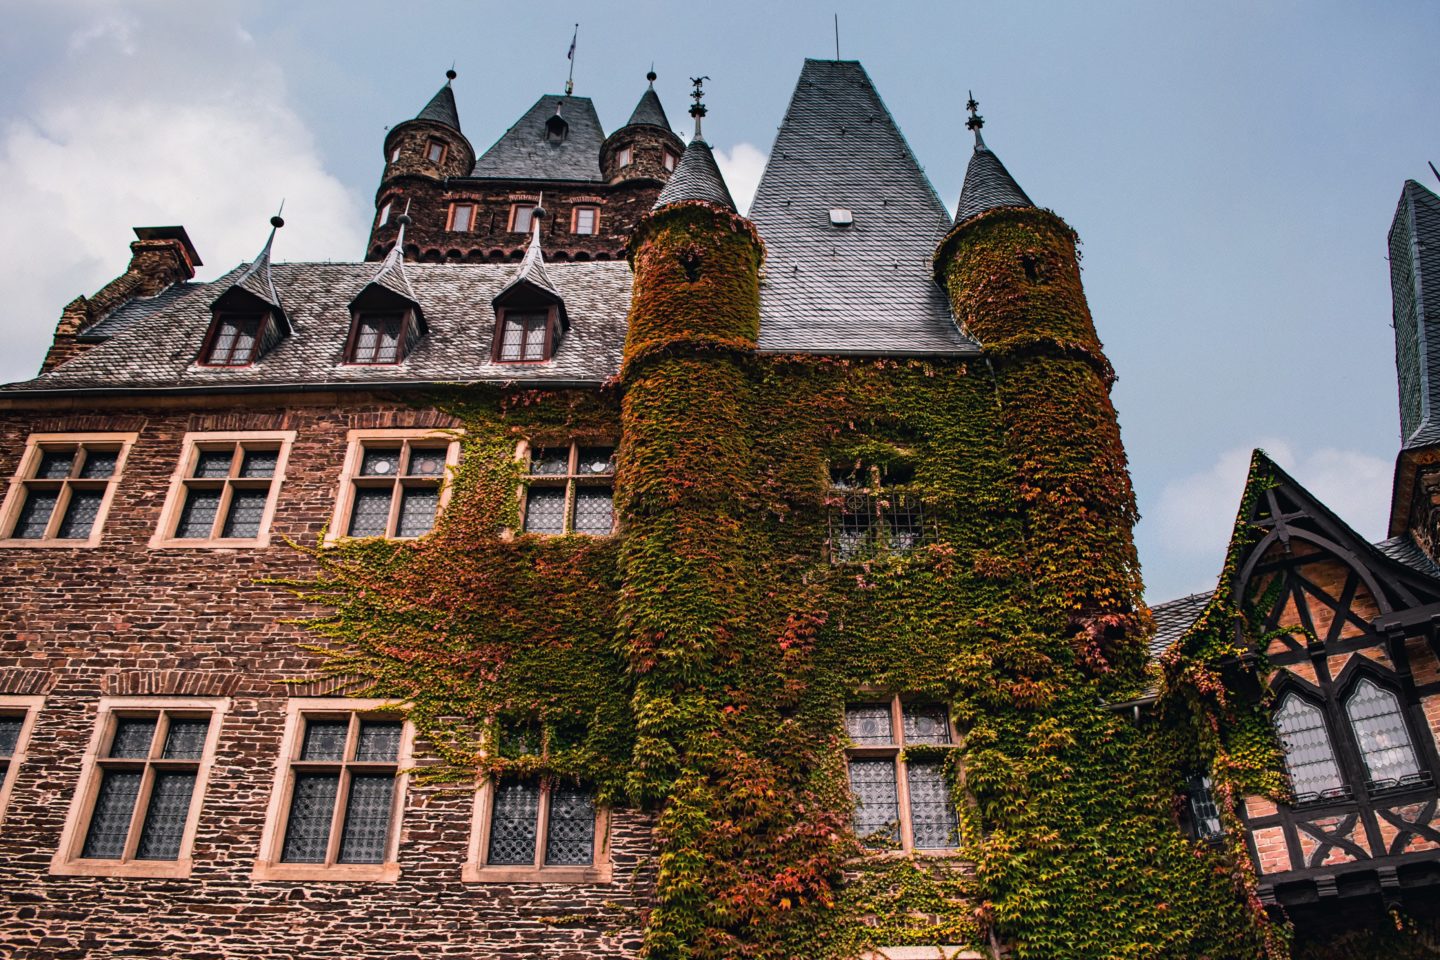 Cochem Castle is stunning in the autumn